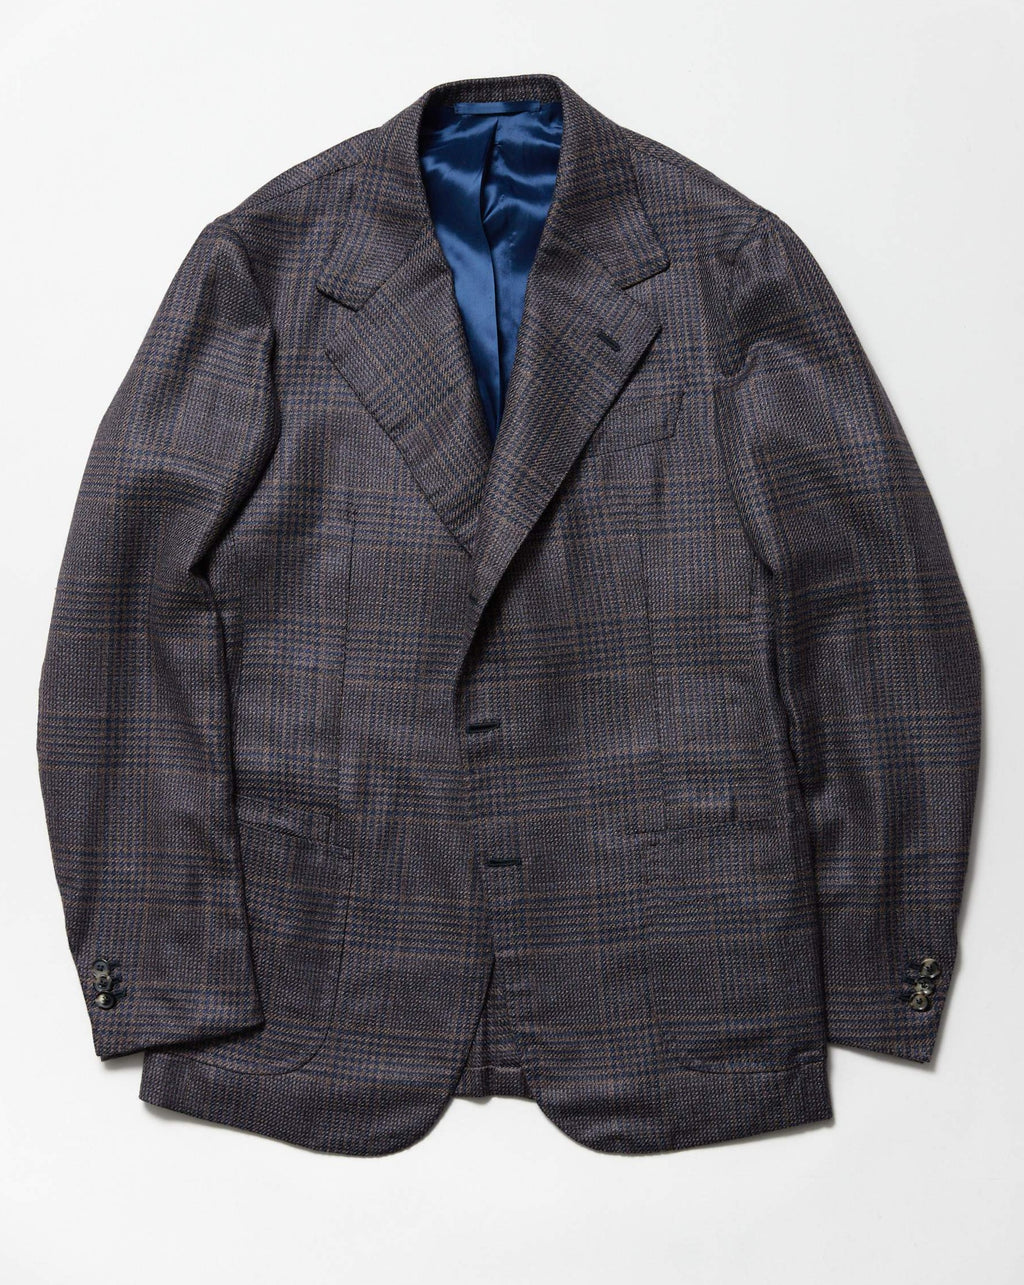 Navy & Brown Wool/Cashmere-Blend Check 'Lee' Jacket – Uncommon Man